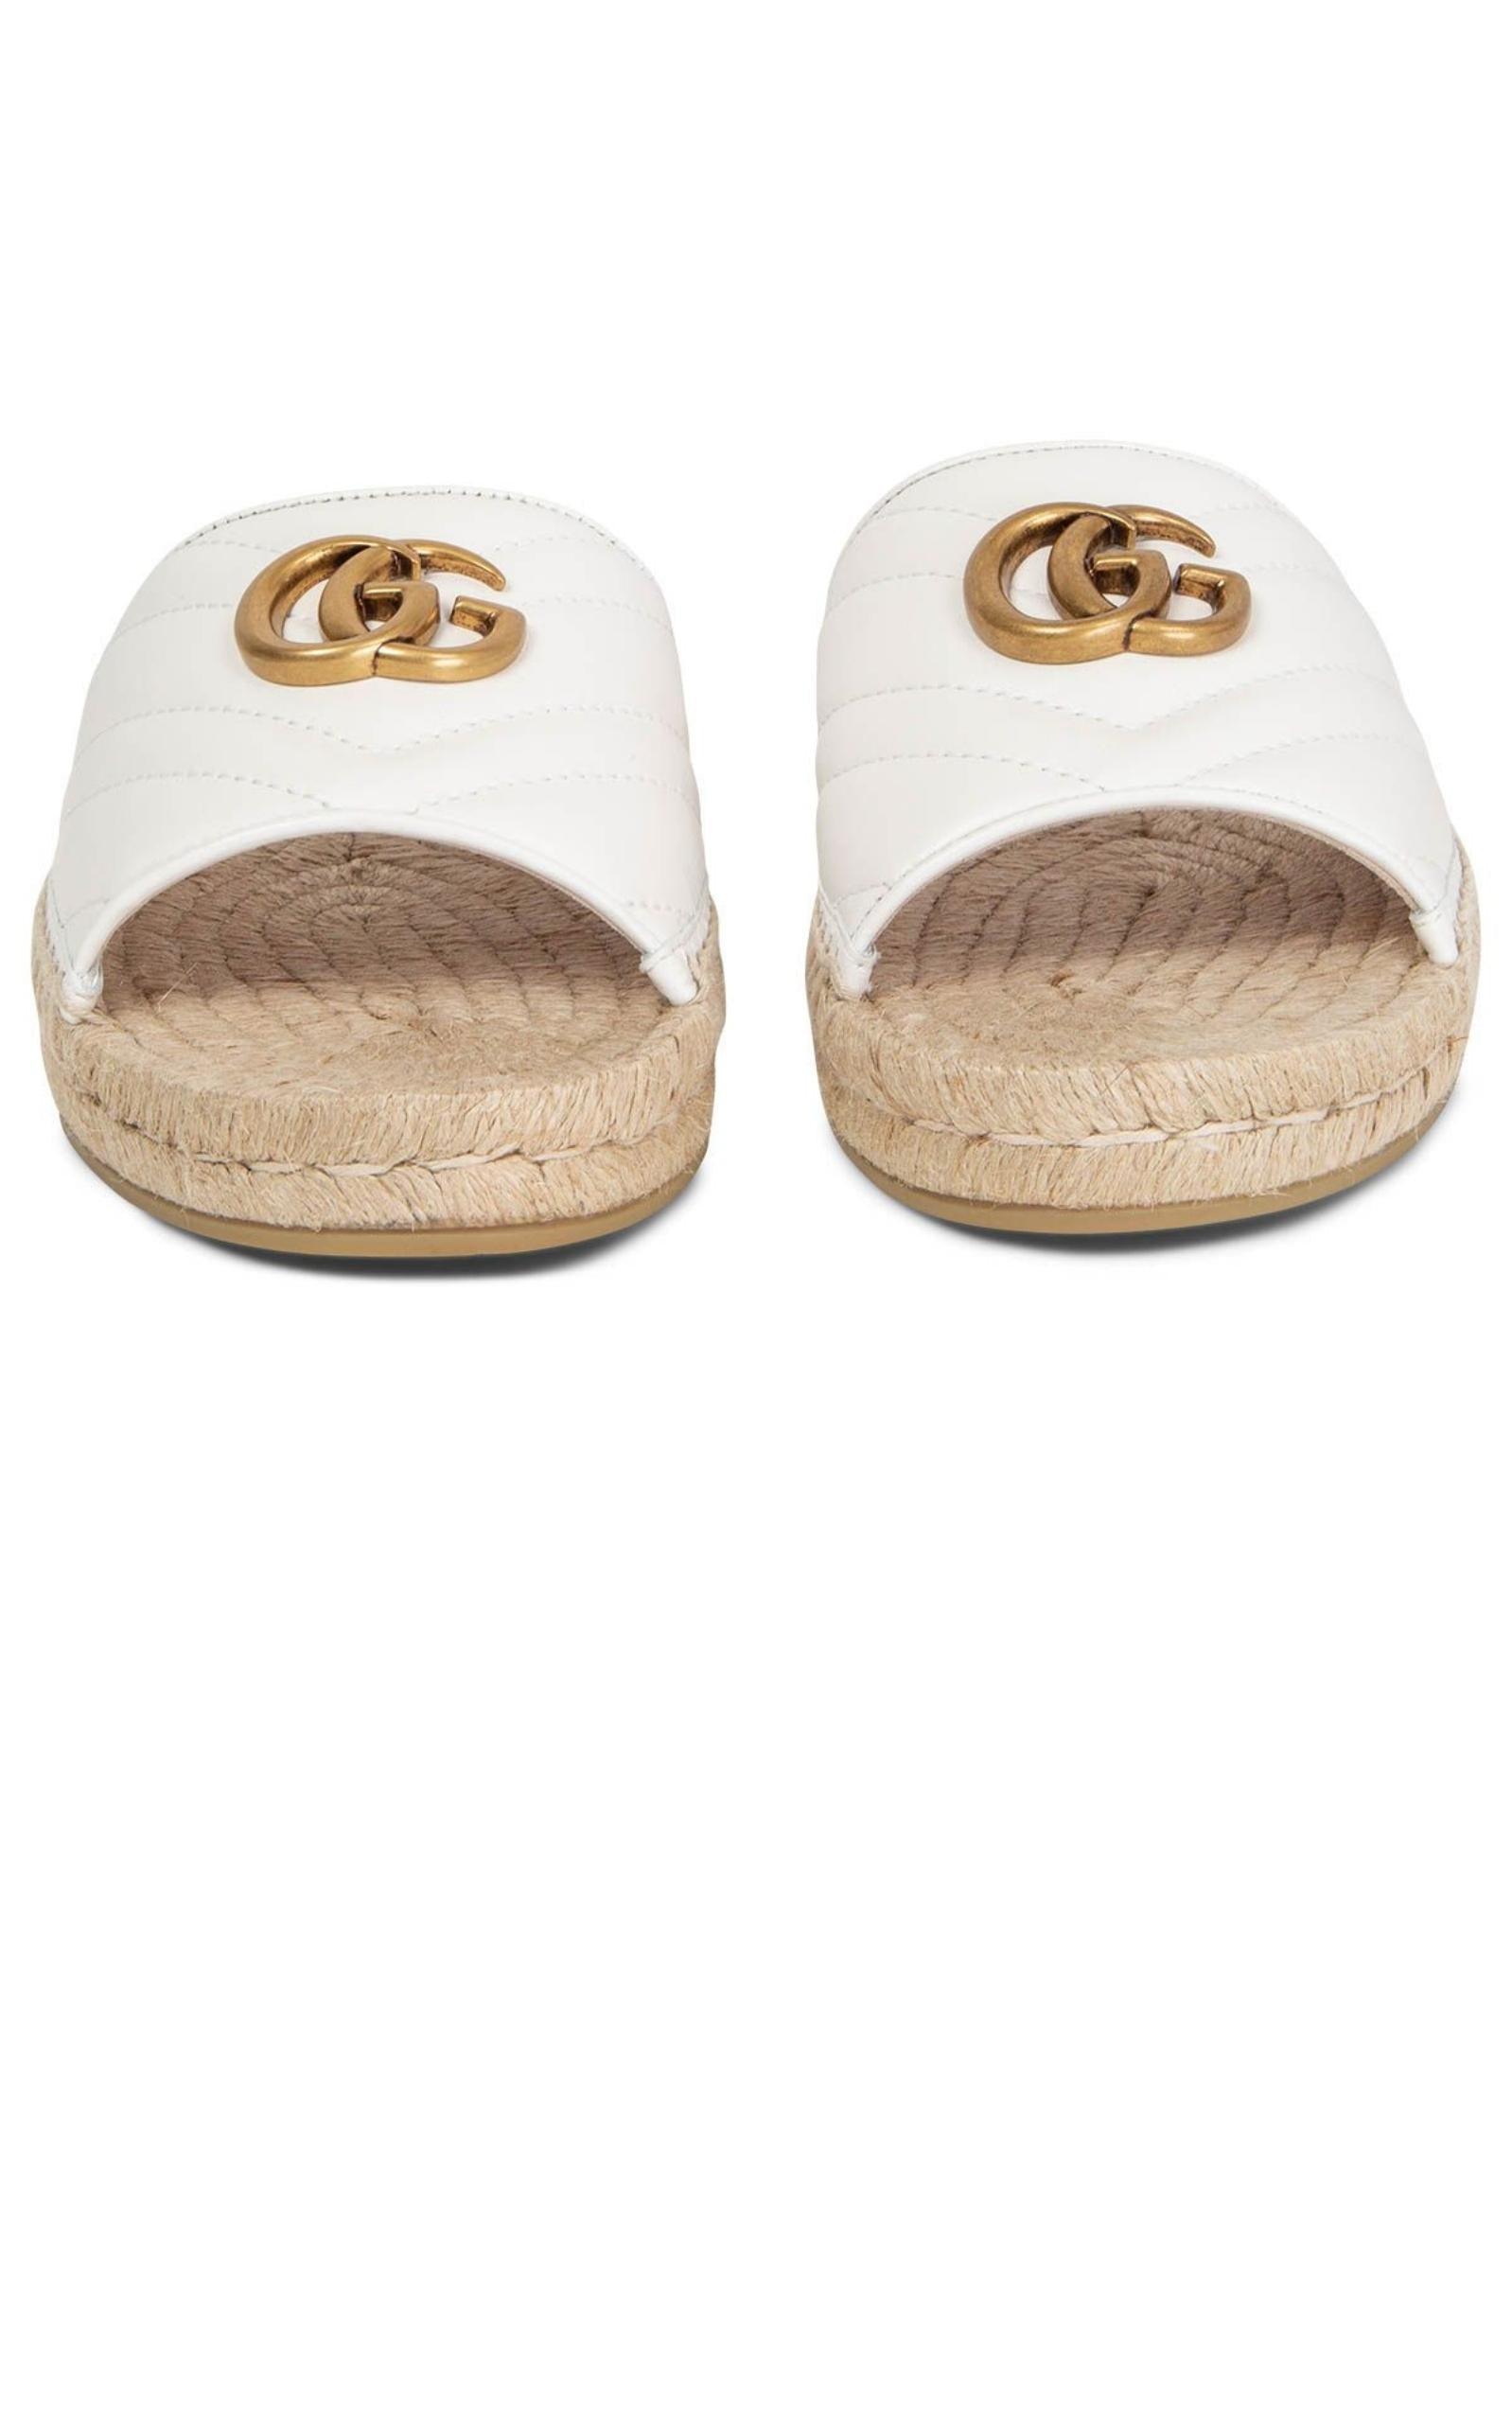  GucciGg Logo Quilted Leather Espadrilles - Runway Catalog